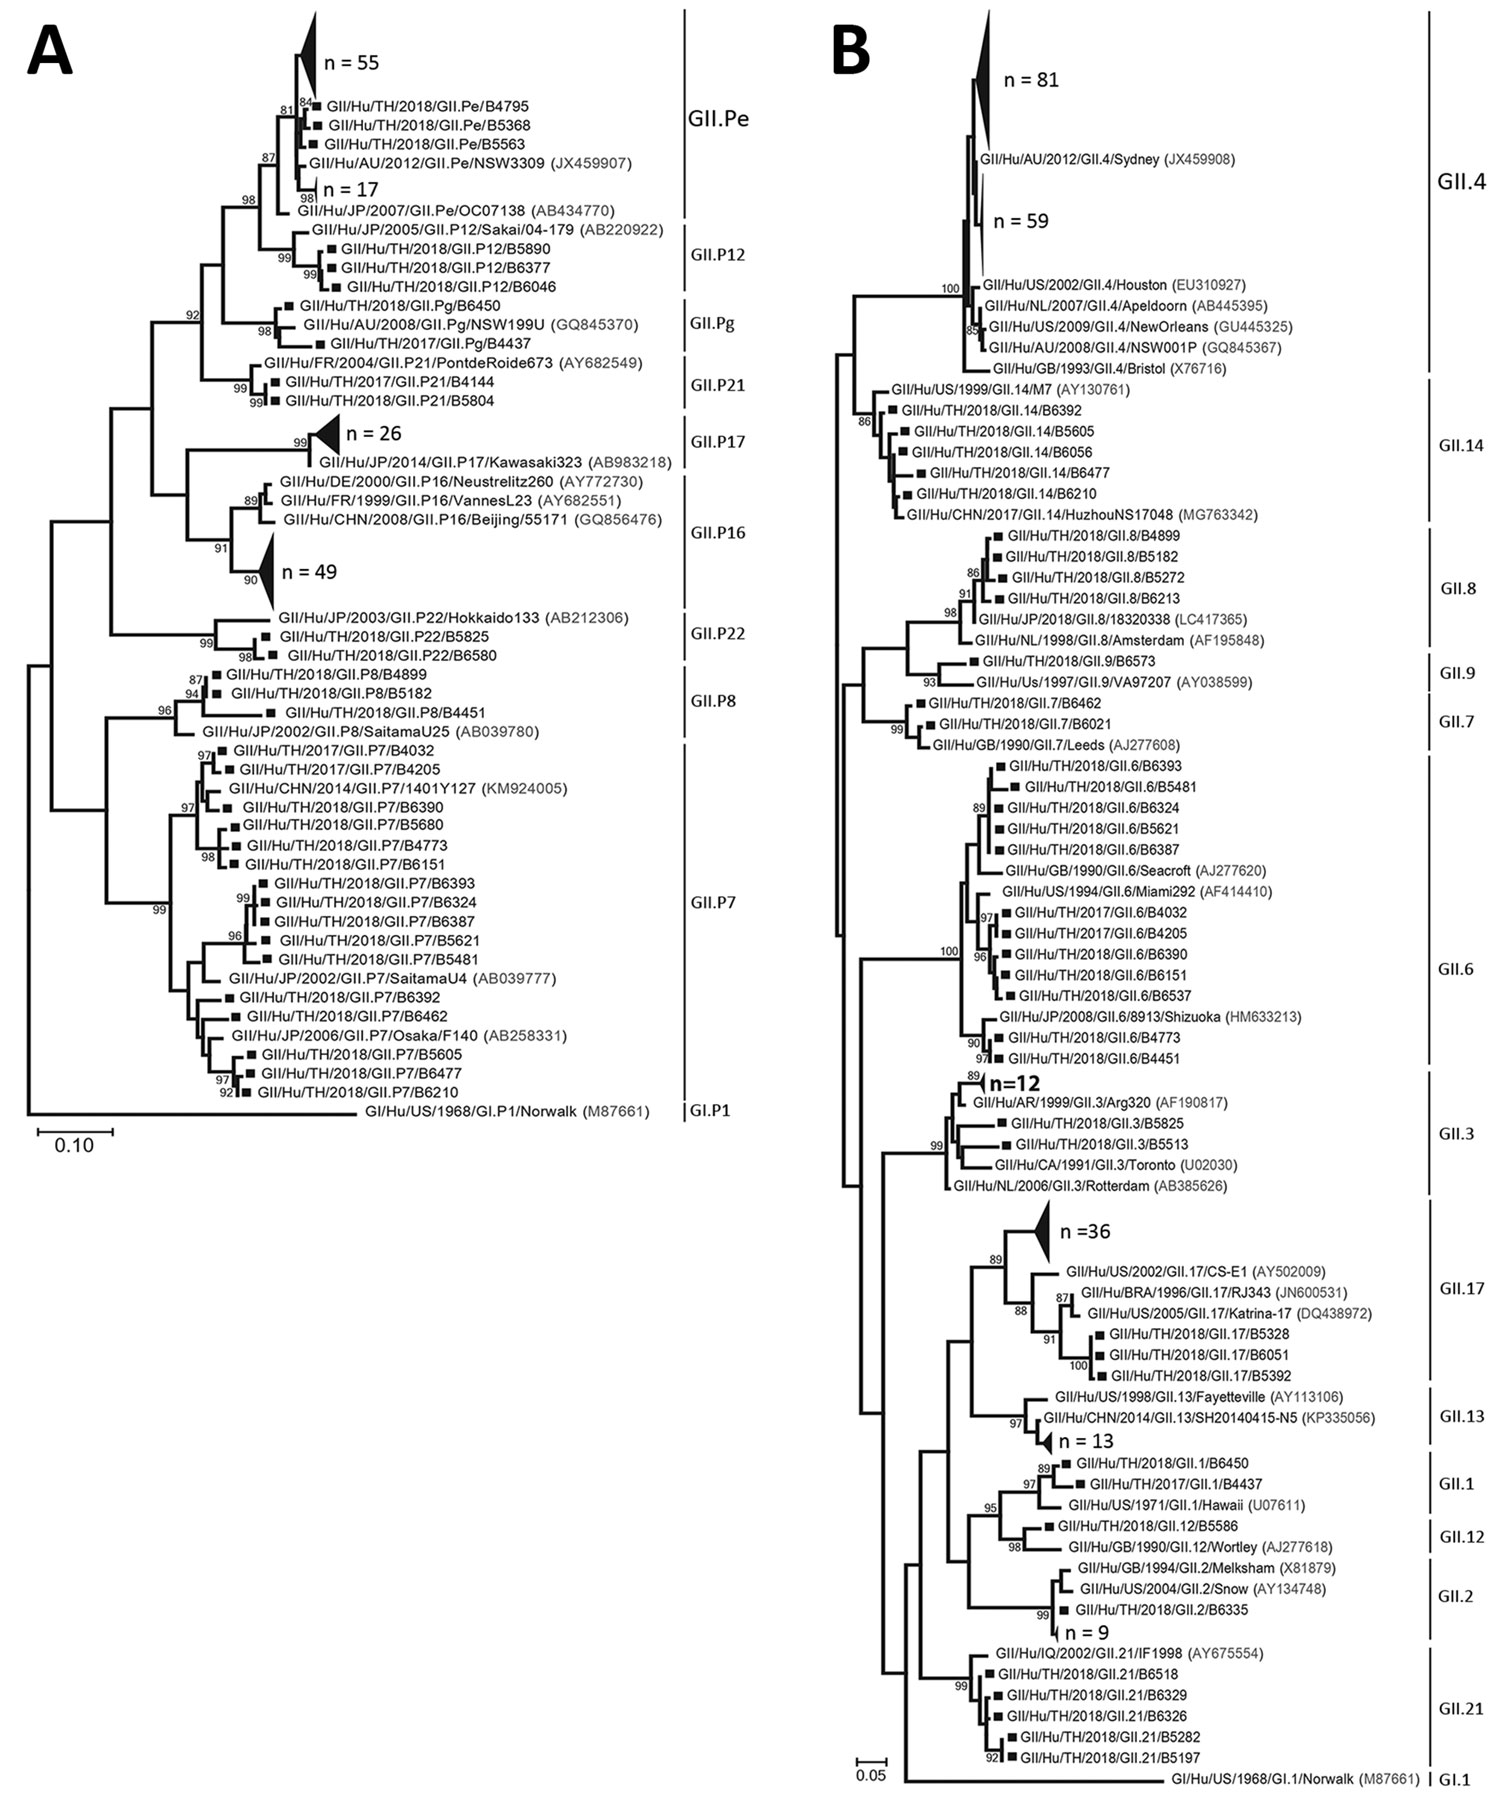 Phylogenetic trees of the norovirus GII partial-nucleotide sequences. A) Analysis of the RNA-dependent RNA polymerase (RdRp) region (380 bp). B) Analysis of the major capsid protein VP1 region (271 bp). Trees were generated by using the maximum-likelihood method with 1,000 bootstrap replicates implemented in MEGA7 (https://www.megasoftware.net). Bootstrap values &gt;80 are indicated at the nodes. Strains of sufficient nucleotide sequence length were included in the trees (denoted individually wi